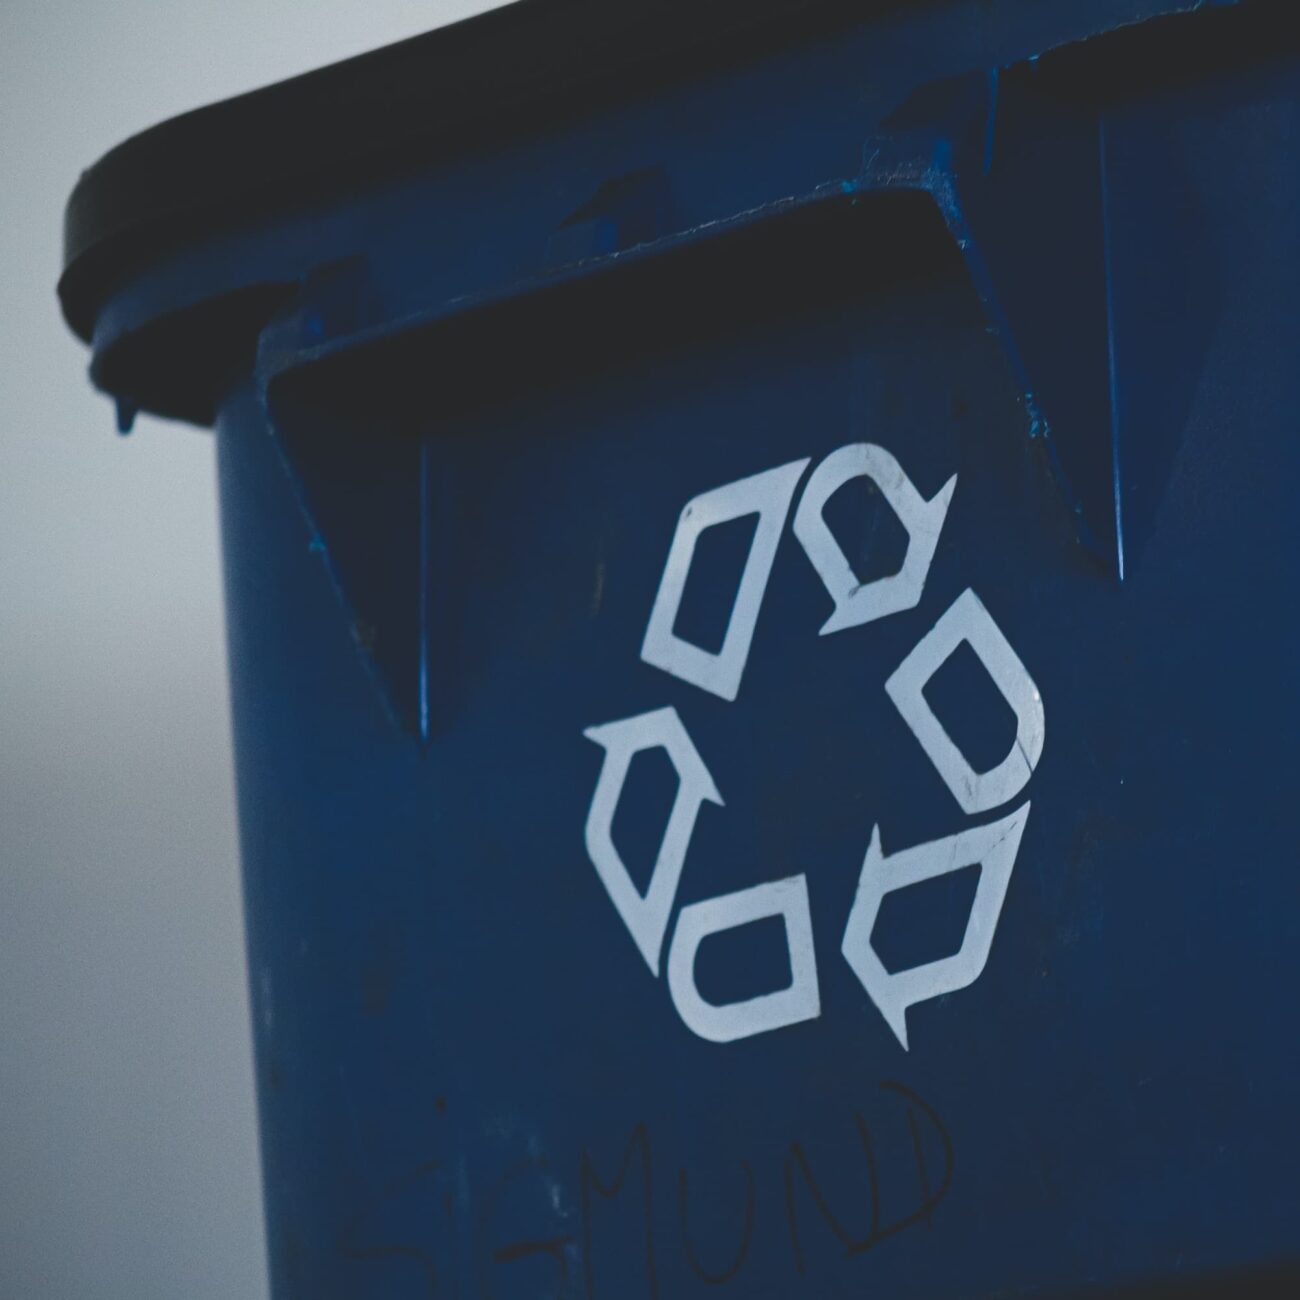 Close up of the recycle symbol on dark blue recycle bin.